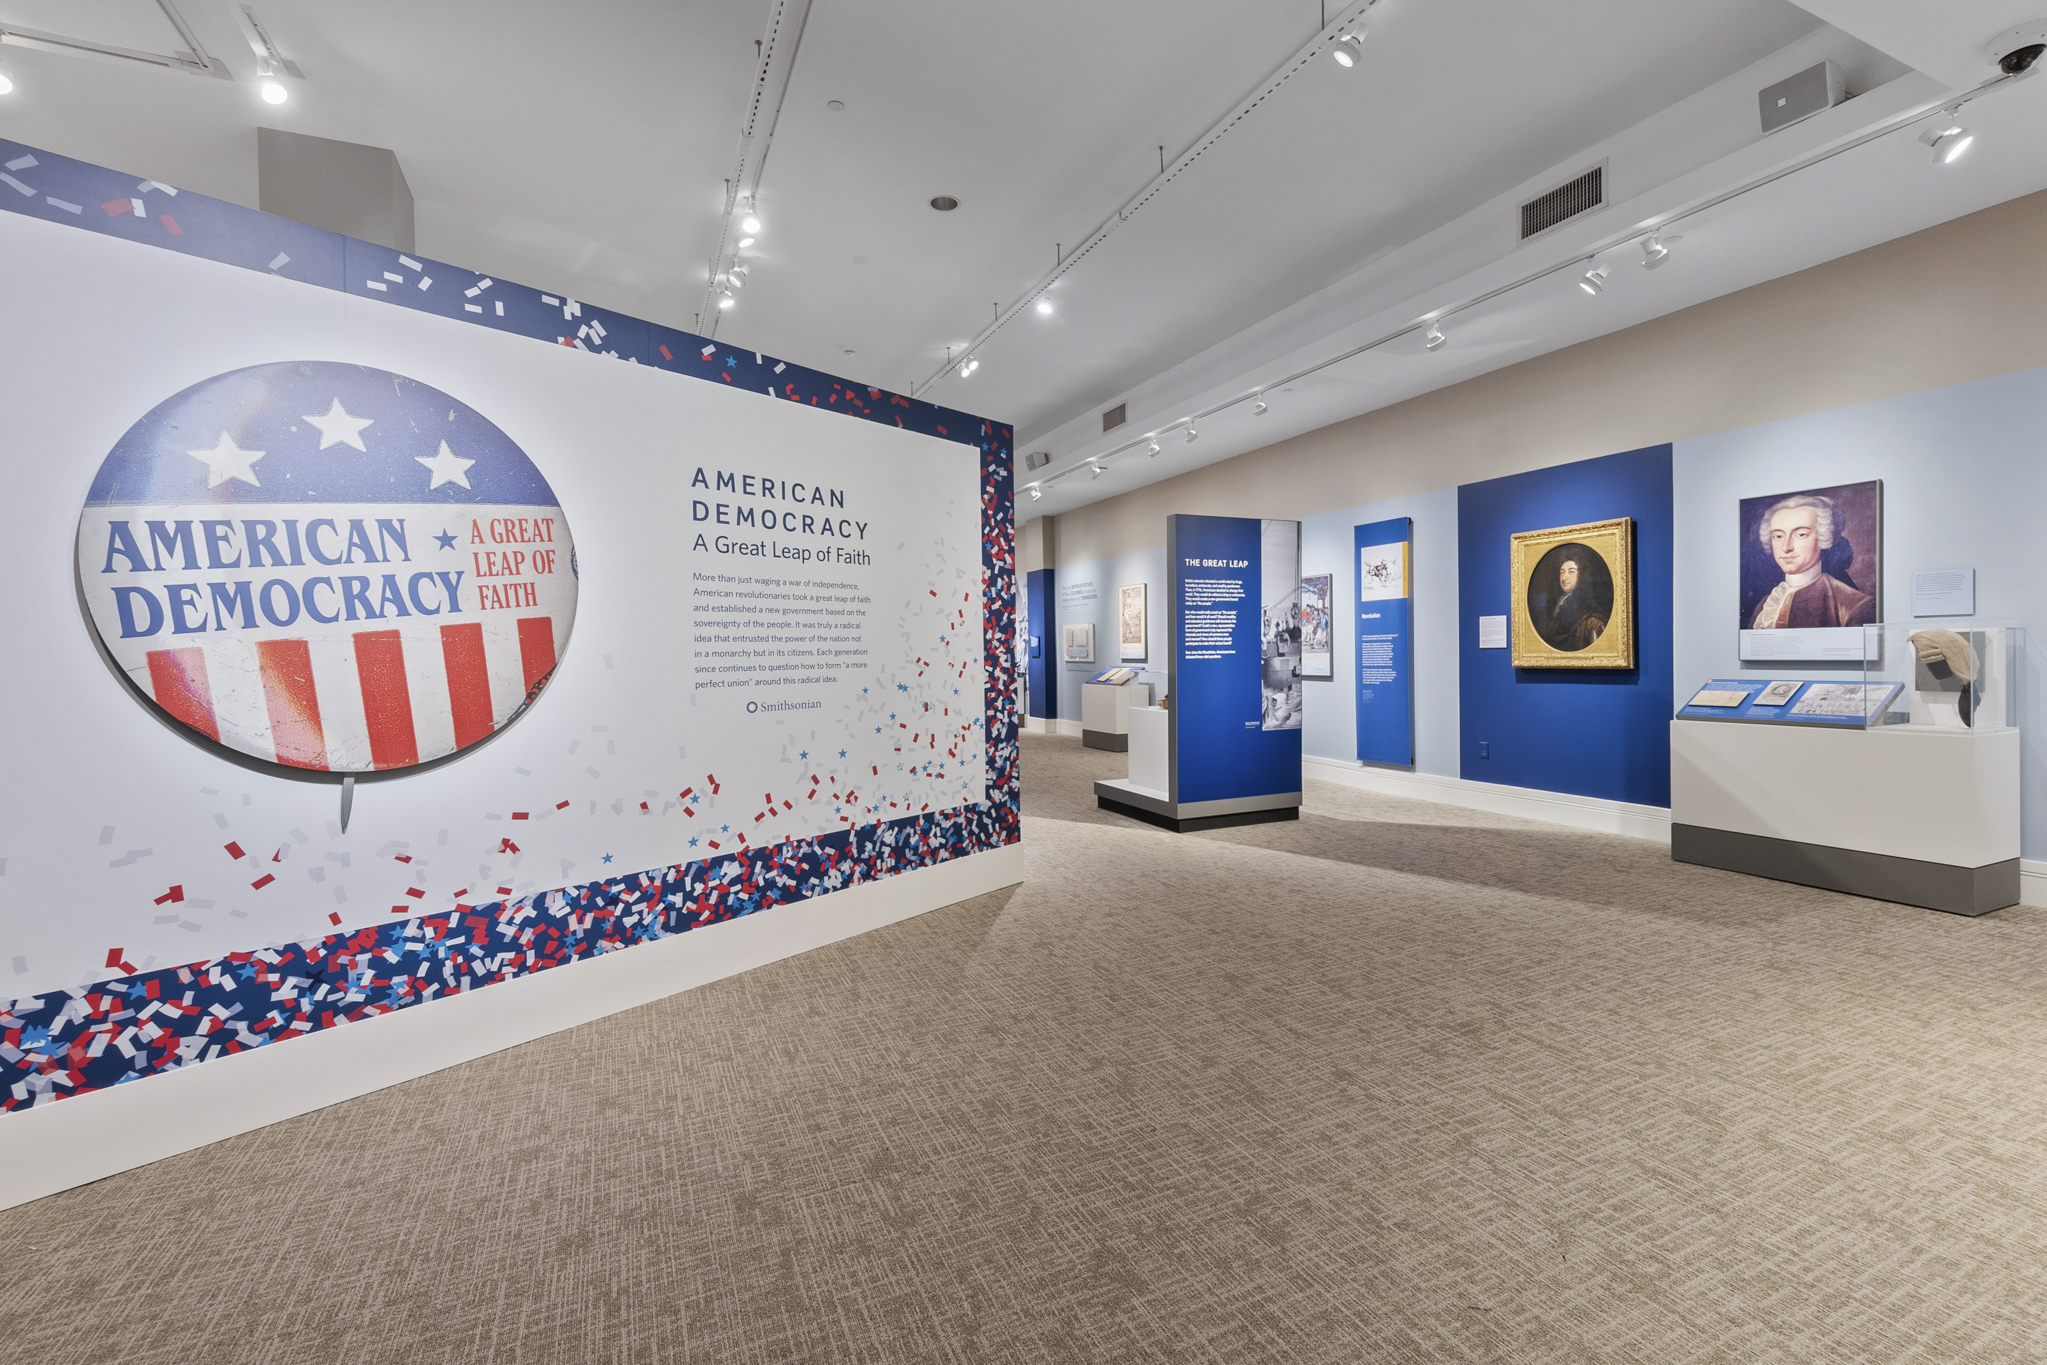 The entrance to a gallery with a wall graphic logo of a political button with American flag design and words American Democracy